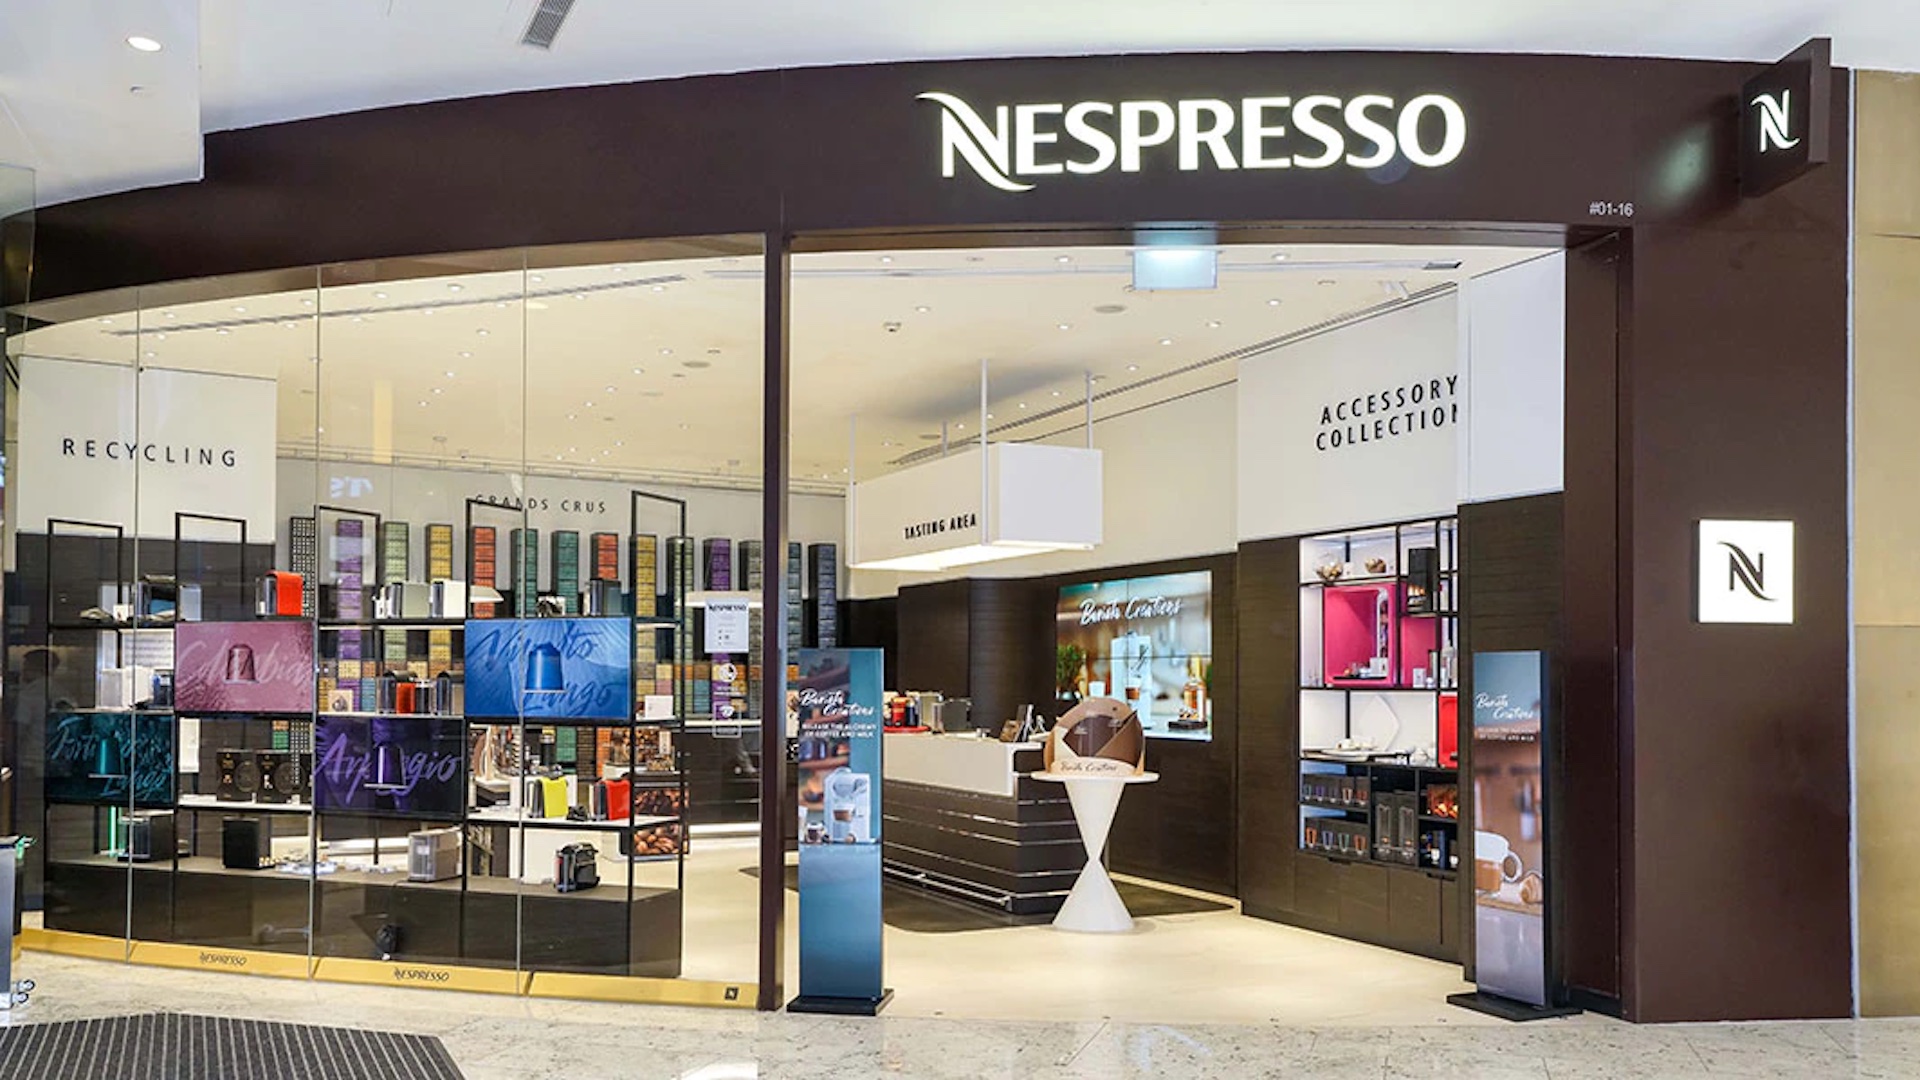 Nespresso: Leveraging the Offline and Online Touchpoints